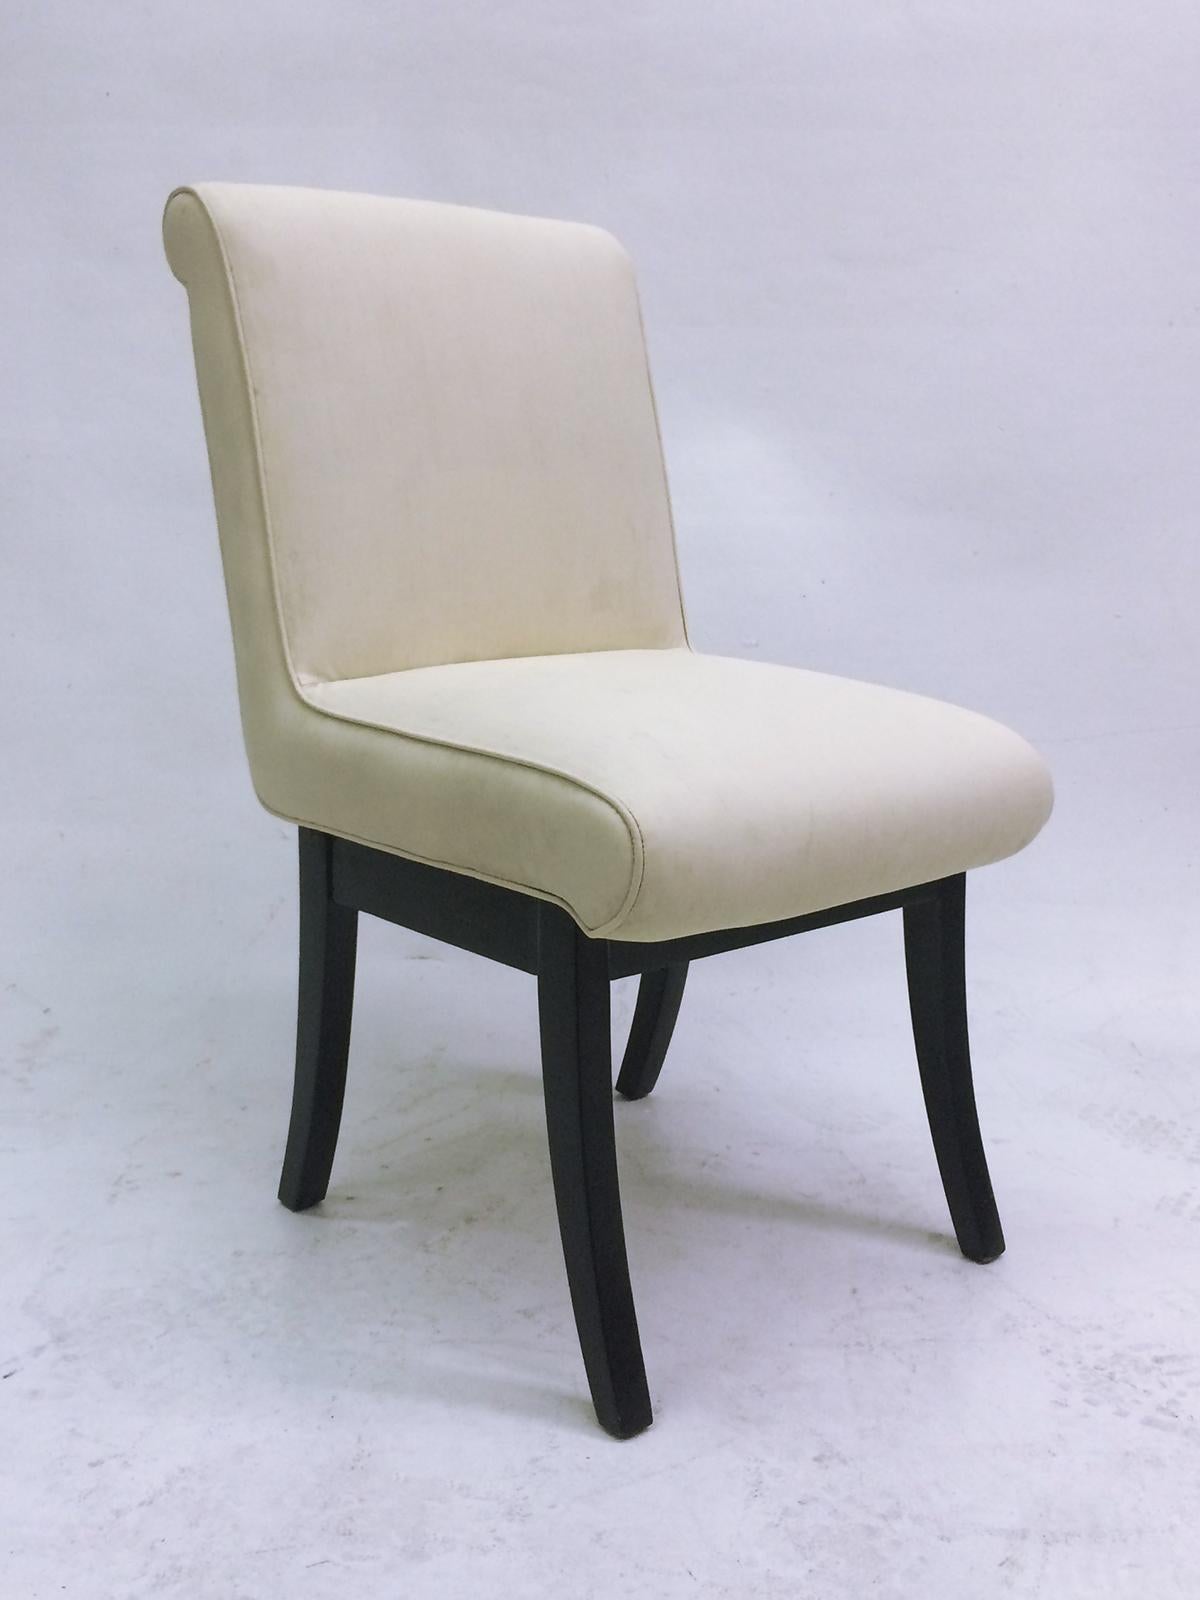 4 Chairs made of ebony stained mahogany legs with off-white original Naugahyde coverings. 
Very comfortable!